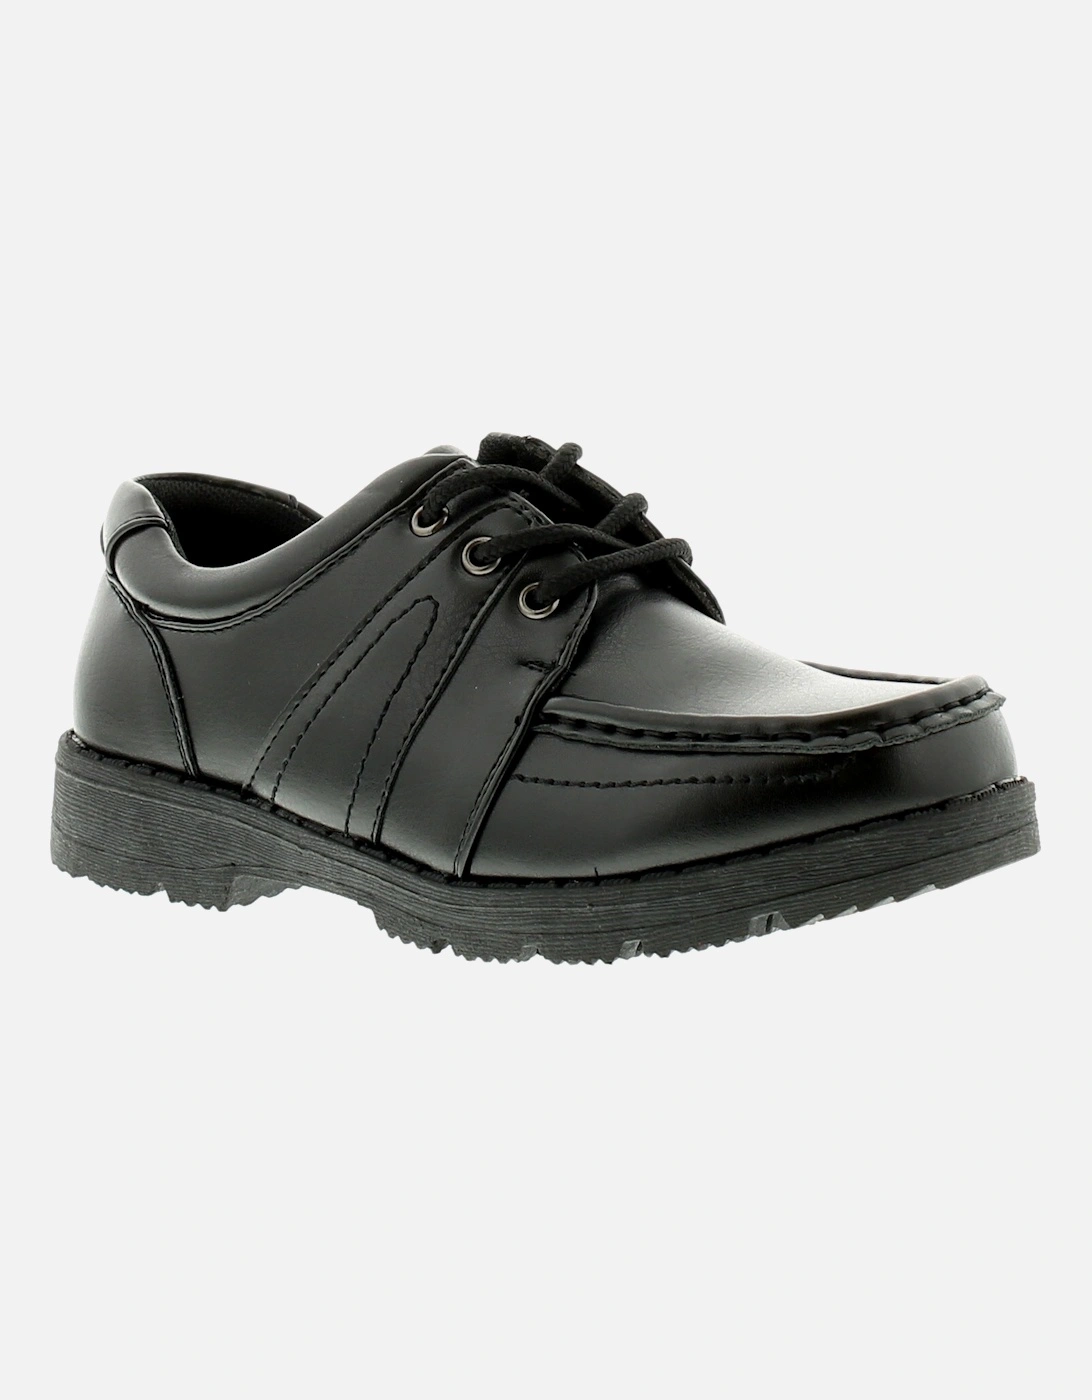 Boys School Shoes Rob Lace Up black UK Size, 5 of 4